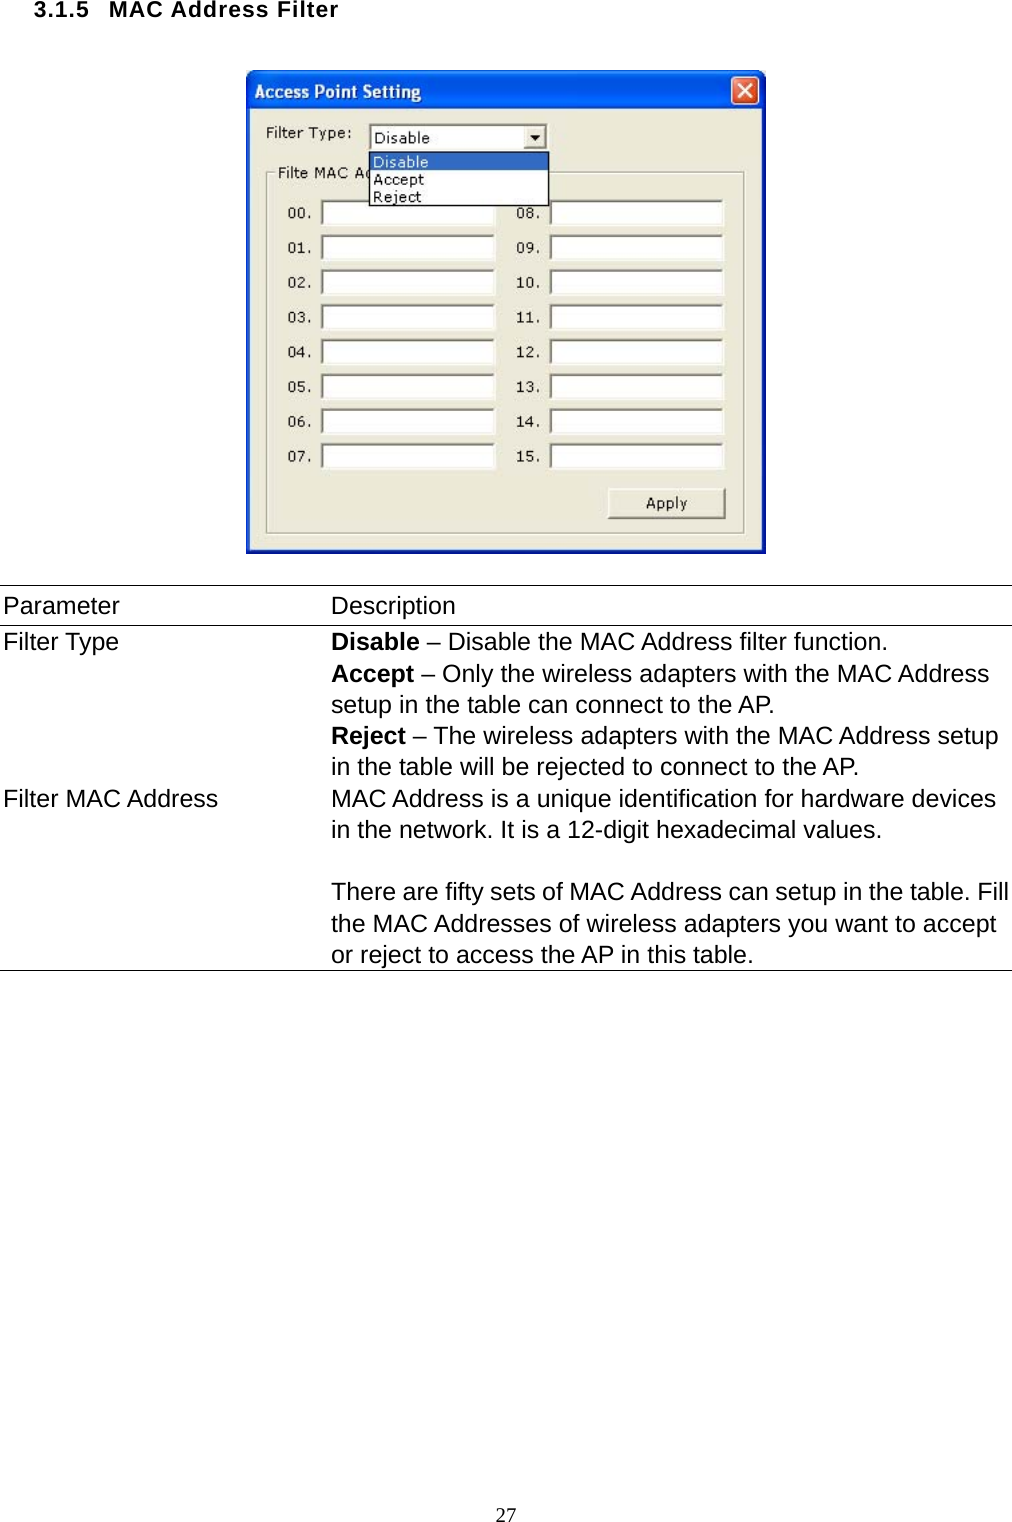  27 3.1.5 MAC Address Filter    Parameter Description Filter Type  Disable – Disable the MAC Address filter function. Accept – Only the wireless adapters with the MAC Address setup in the table can connect to the AP. Reject – The wireless adapters with the MAC Address setup in the table will be rejected to connect to the AP. Filter MAC Address  MAC Address is a unique identification for hardware devices in the network. It is a 12-digit hexadecimal values.    There are fifty sets of MAC Address can setup in the table. Fill the MAC Addresses of wireless adapters you want to accept or reject to access the AP in this table.                  